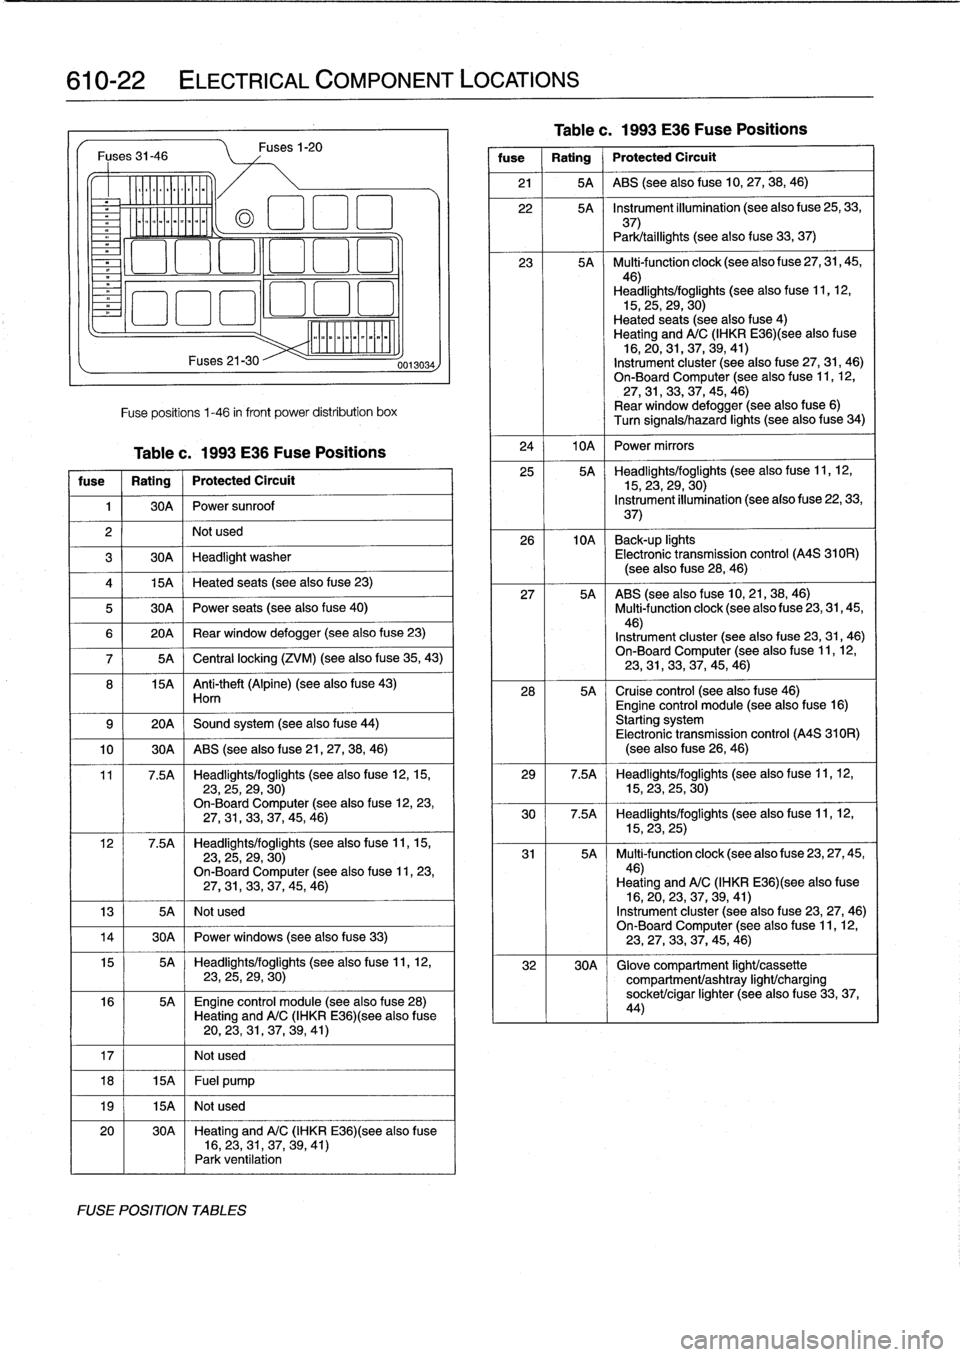 BMW 323i 1997 E36 Workshop Manual 
610-22

	

ELECTRICAL
COMPONENT
LOCATIONS

Fuses
31-46

Ylililll

milililil
Fuses
21-30
Fuse
positions
1-46
in
front
Power
distribution
box

Table
c
.
1993
E36
Fuse
Positions

fuse

	

1
Rating

	

j